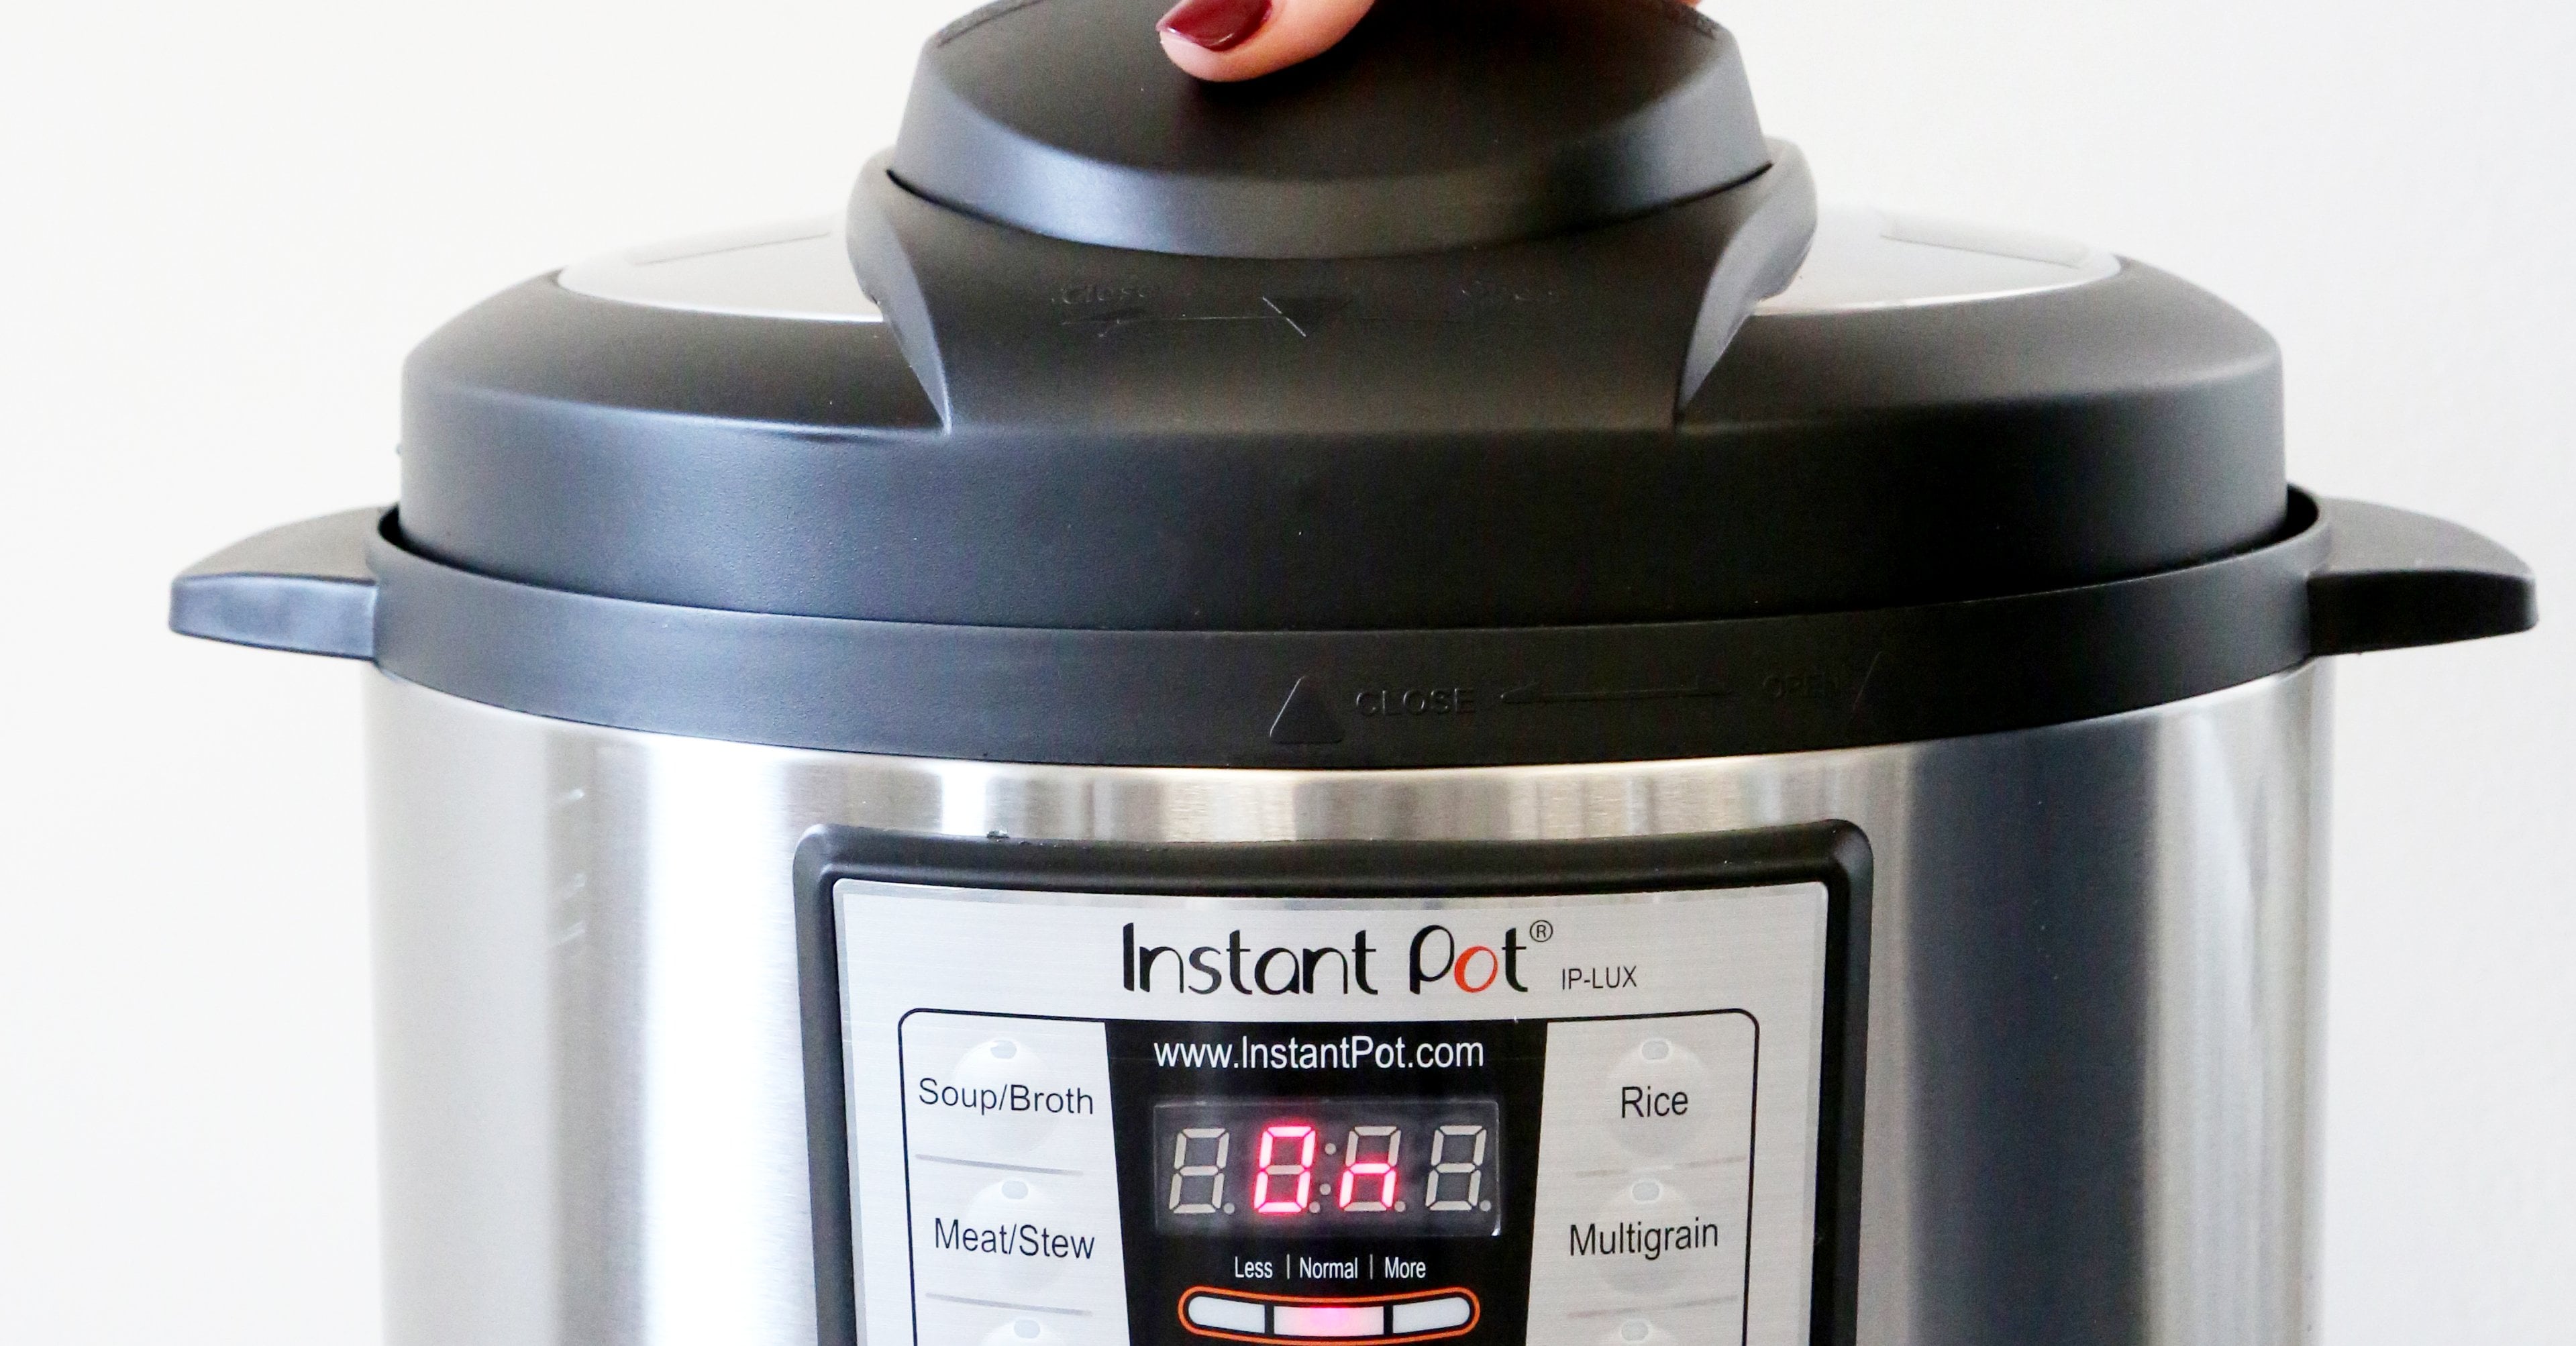 About - Fueled By Instant Pot